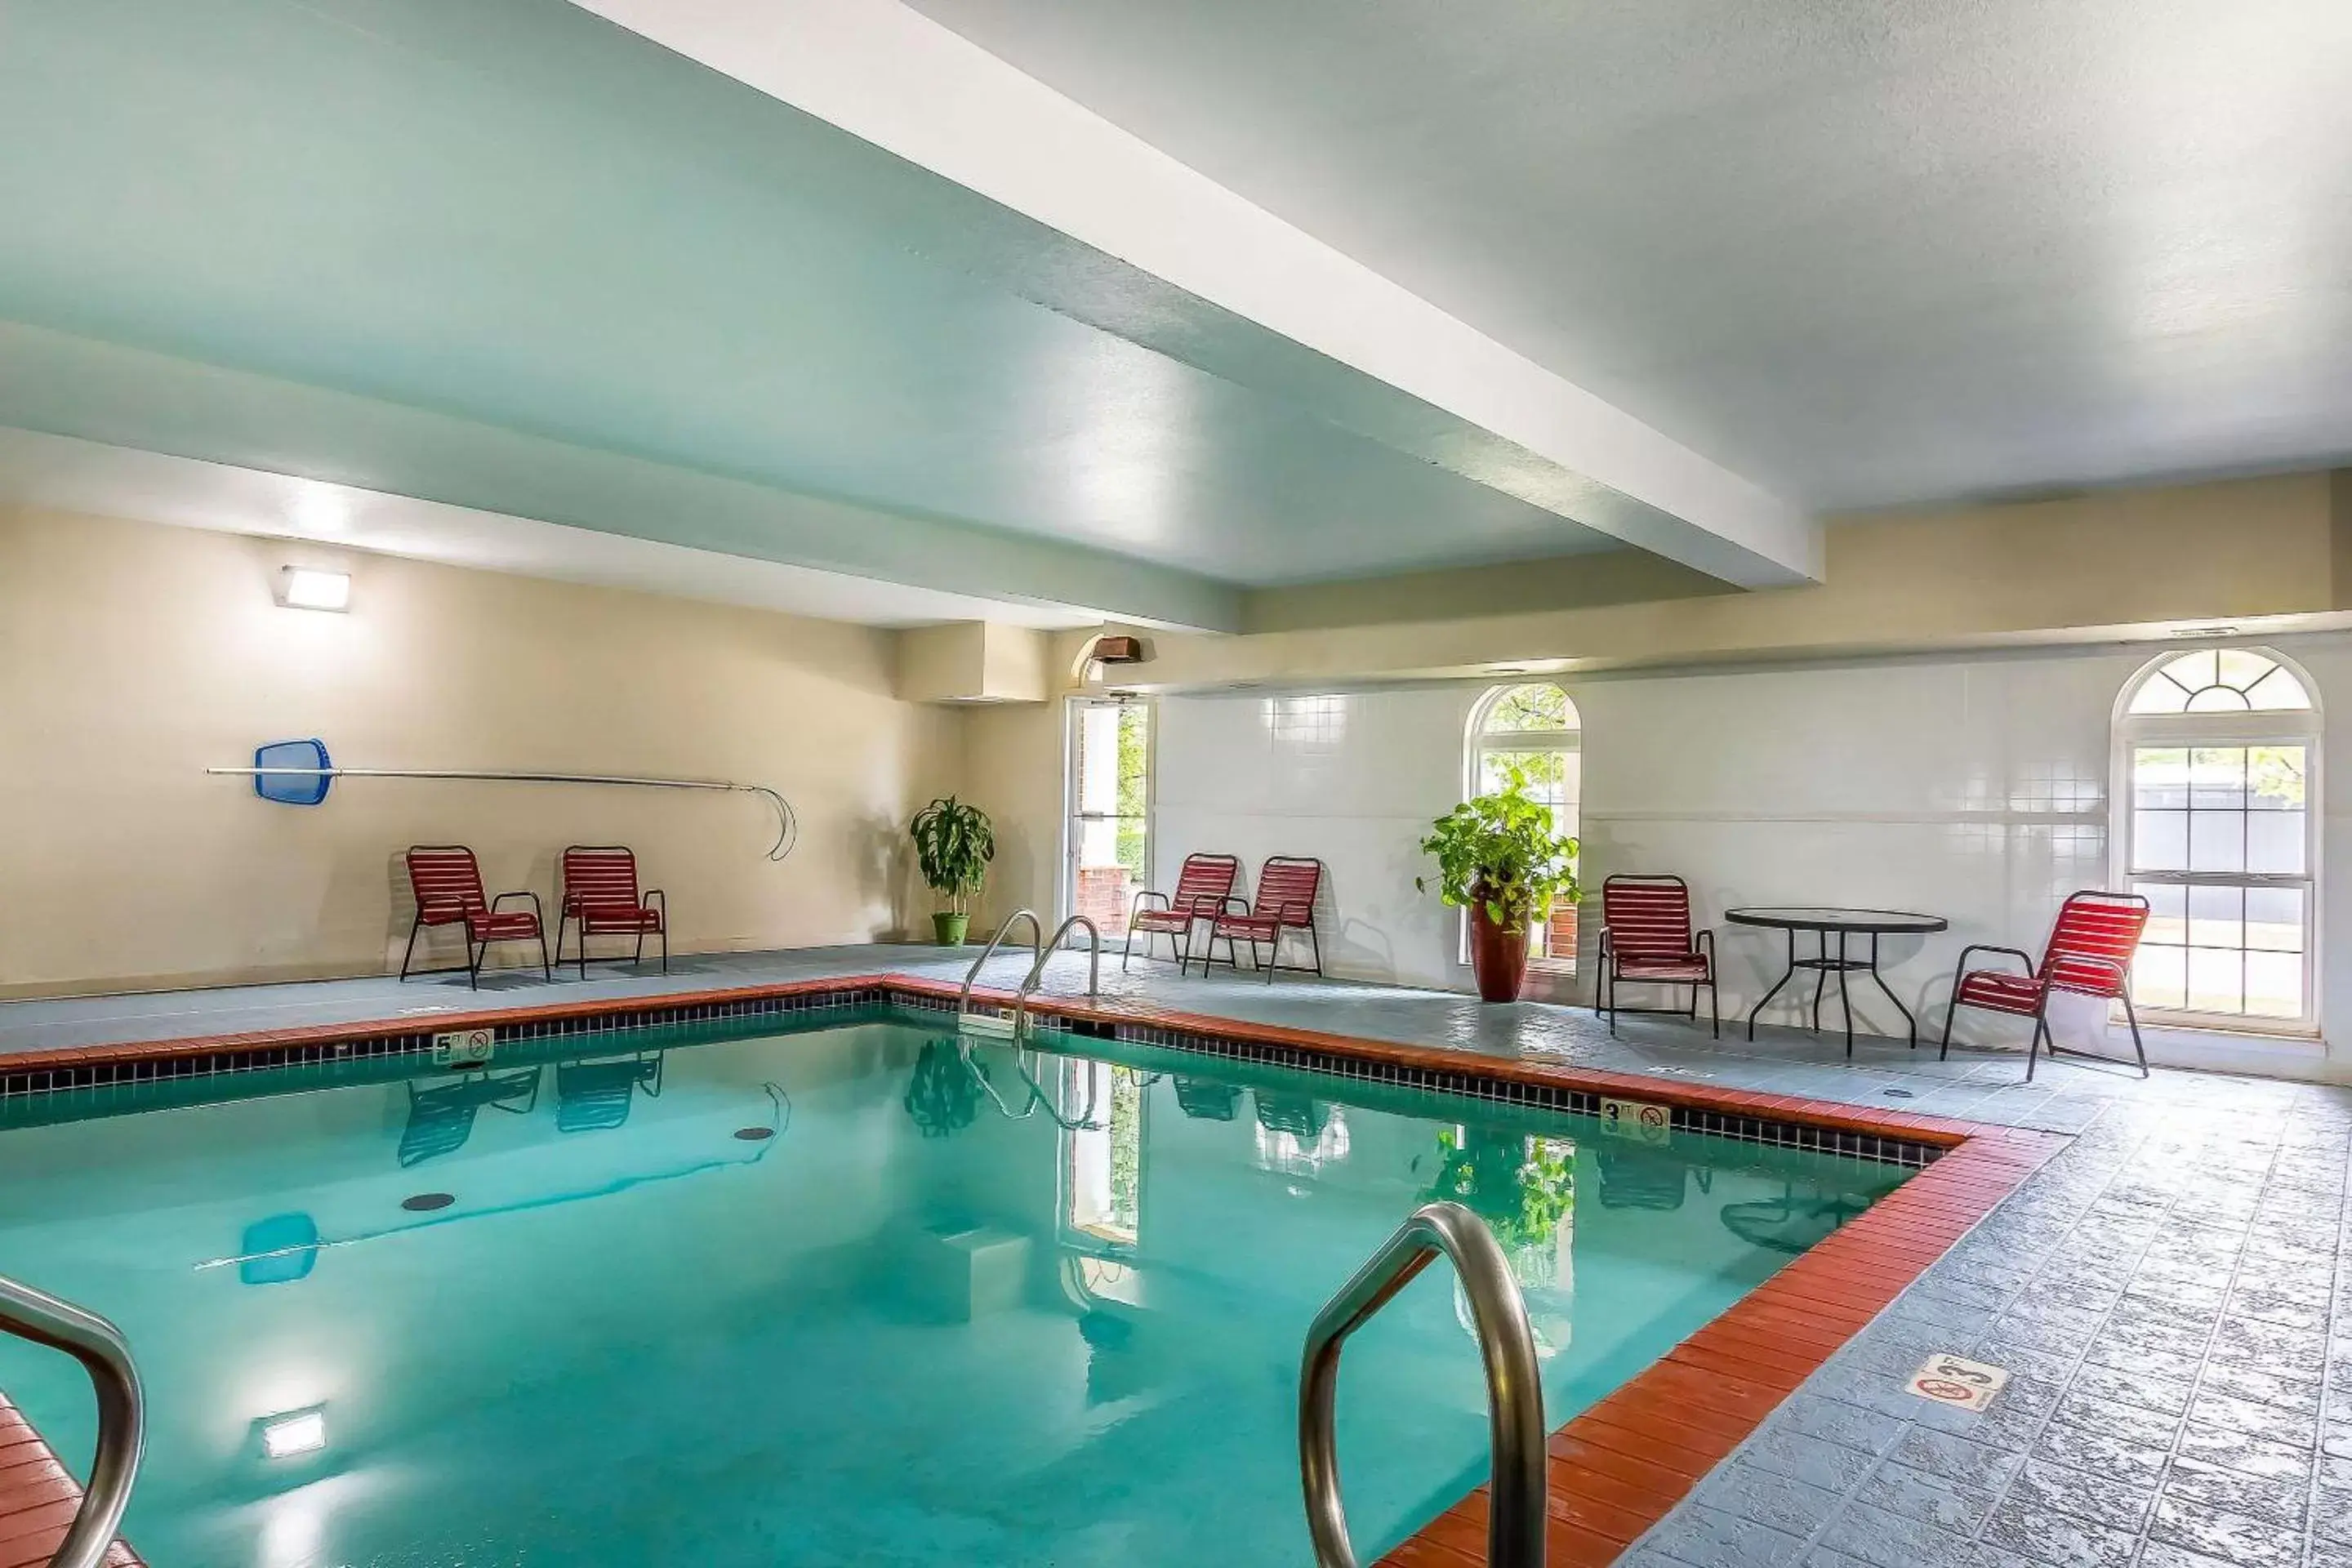 On site, Swimming Pool in Quality Inn & Suites Chesterfield Village